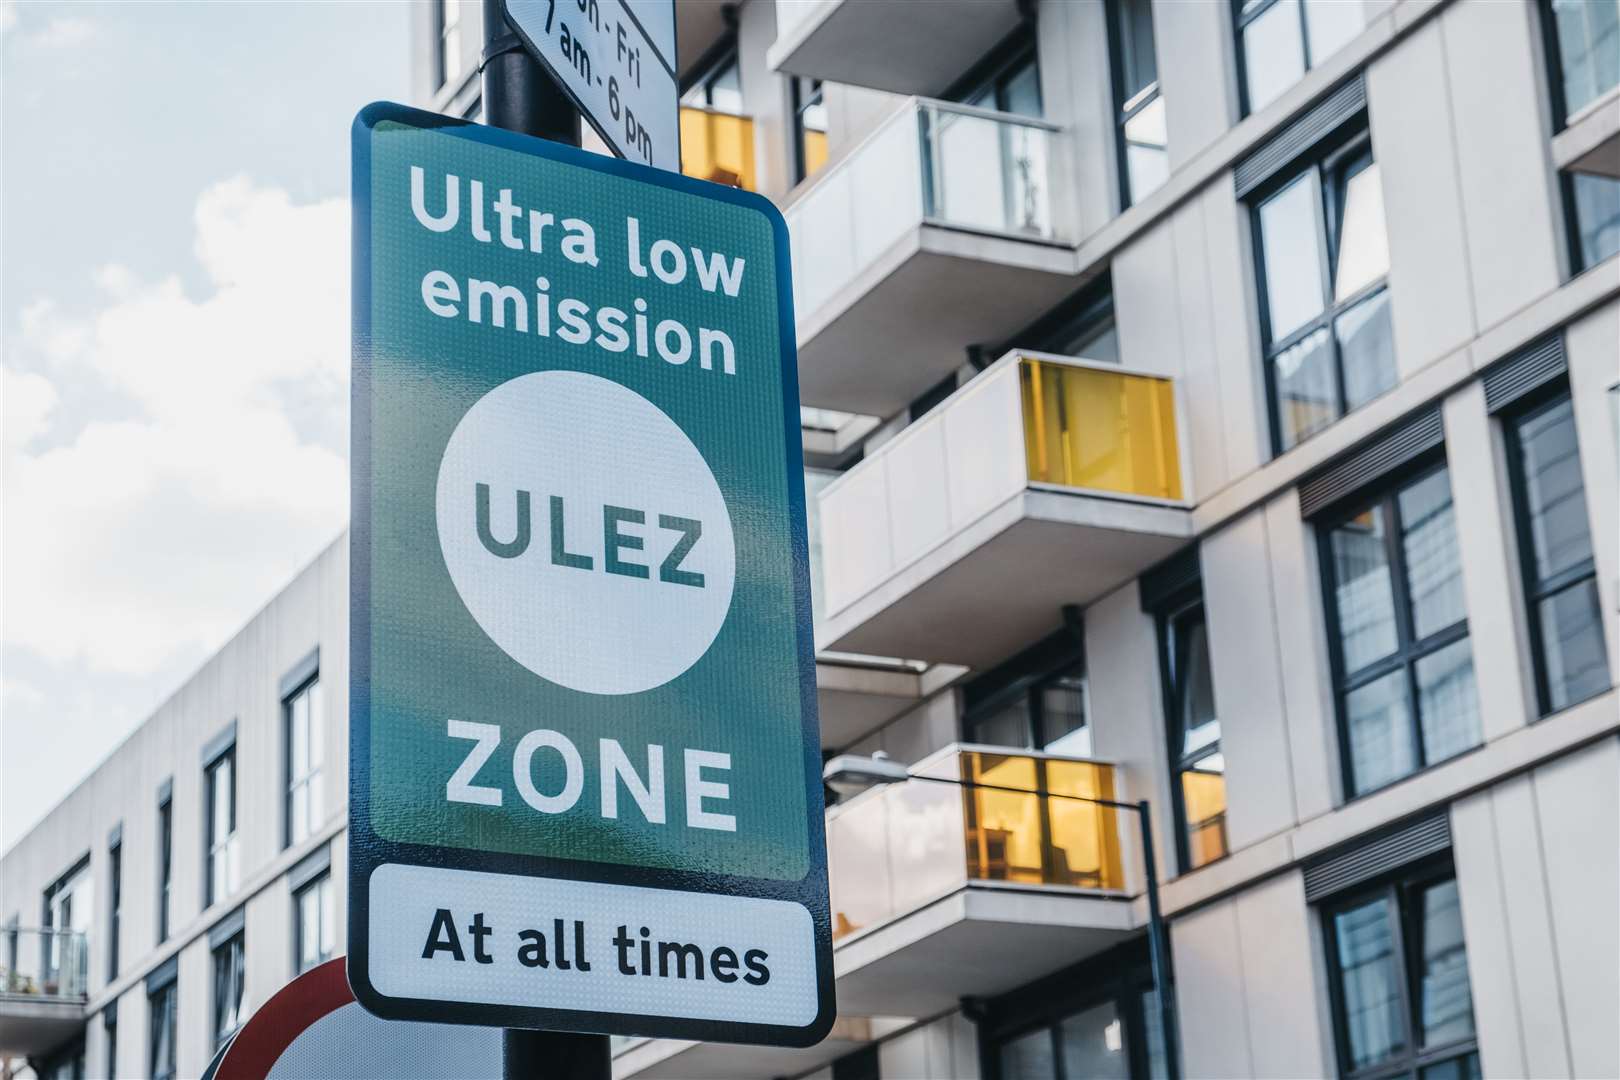 The ULEZ will be expanded from August